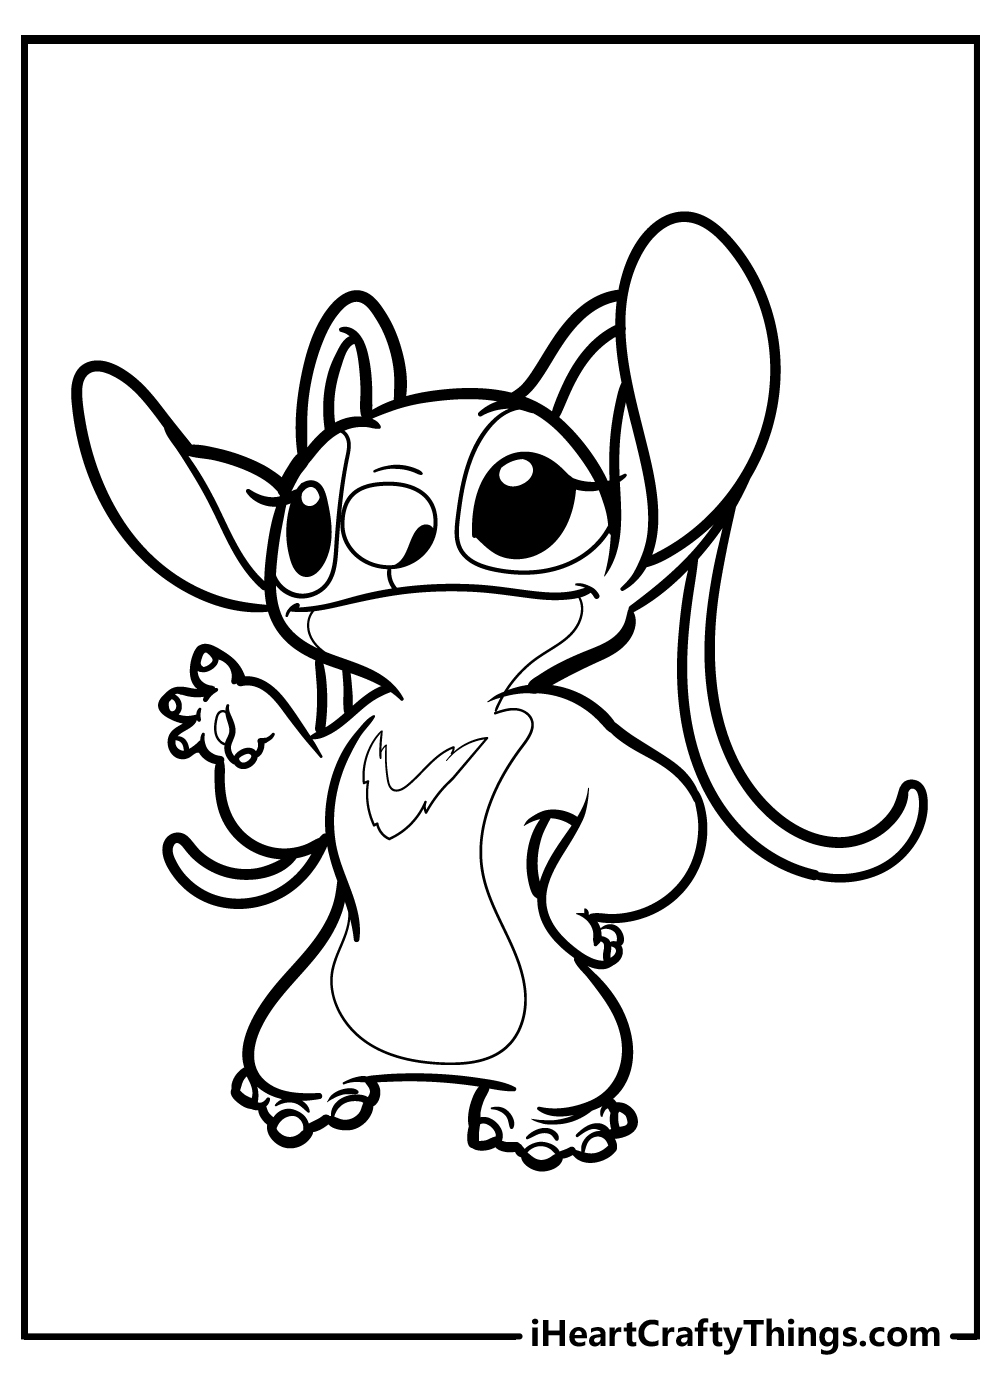 Stitch And Angel Coloring Pages - Coloring Home